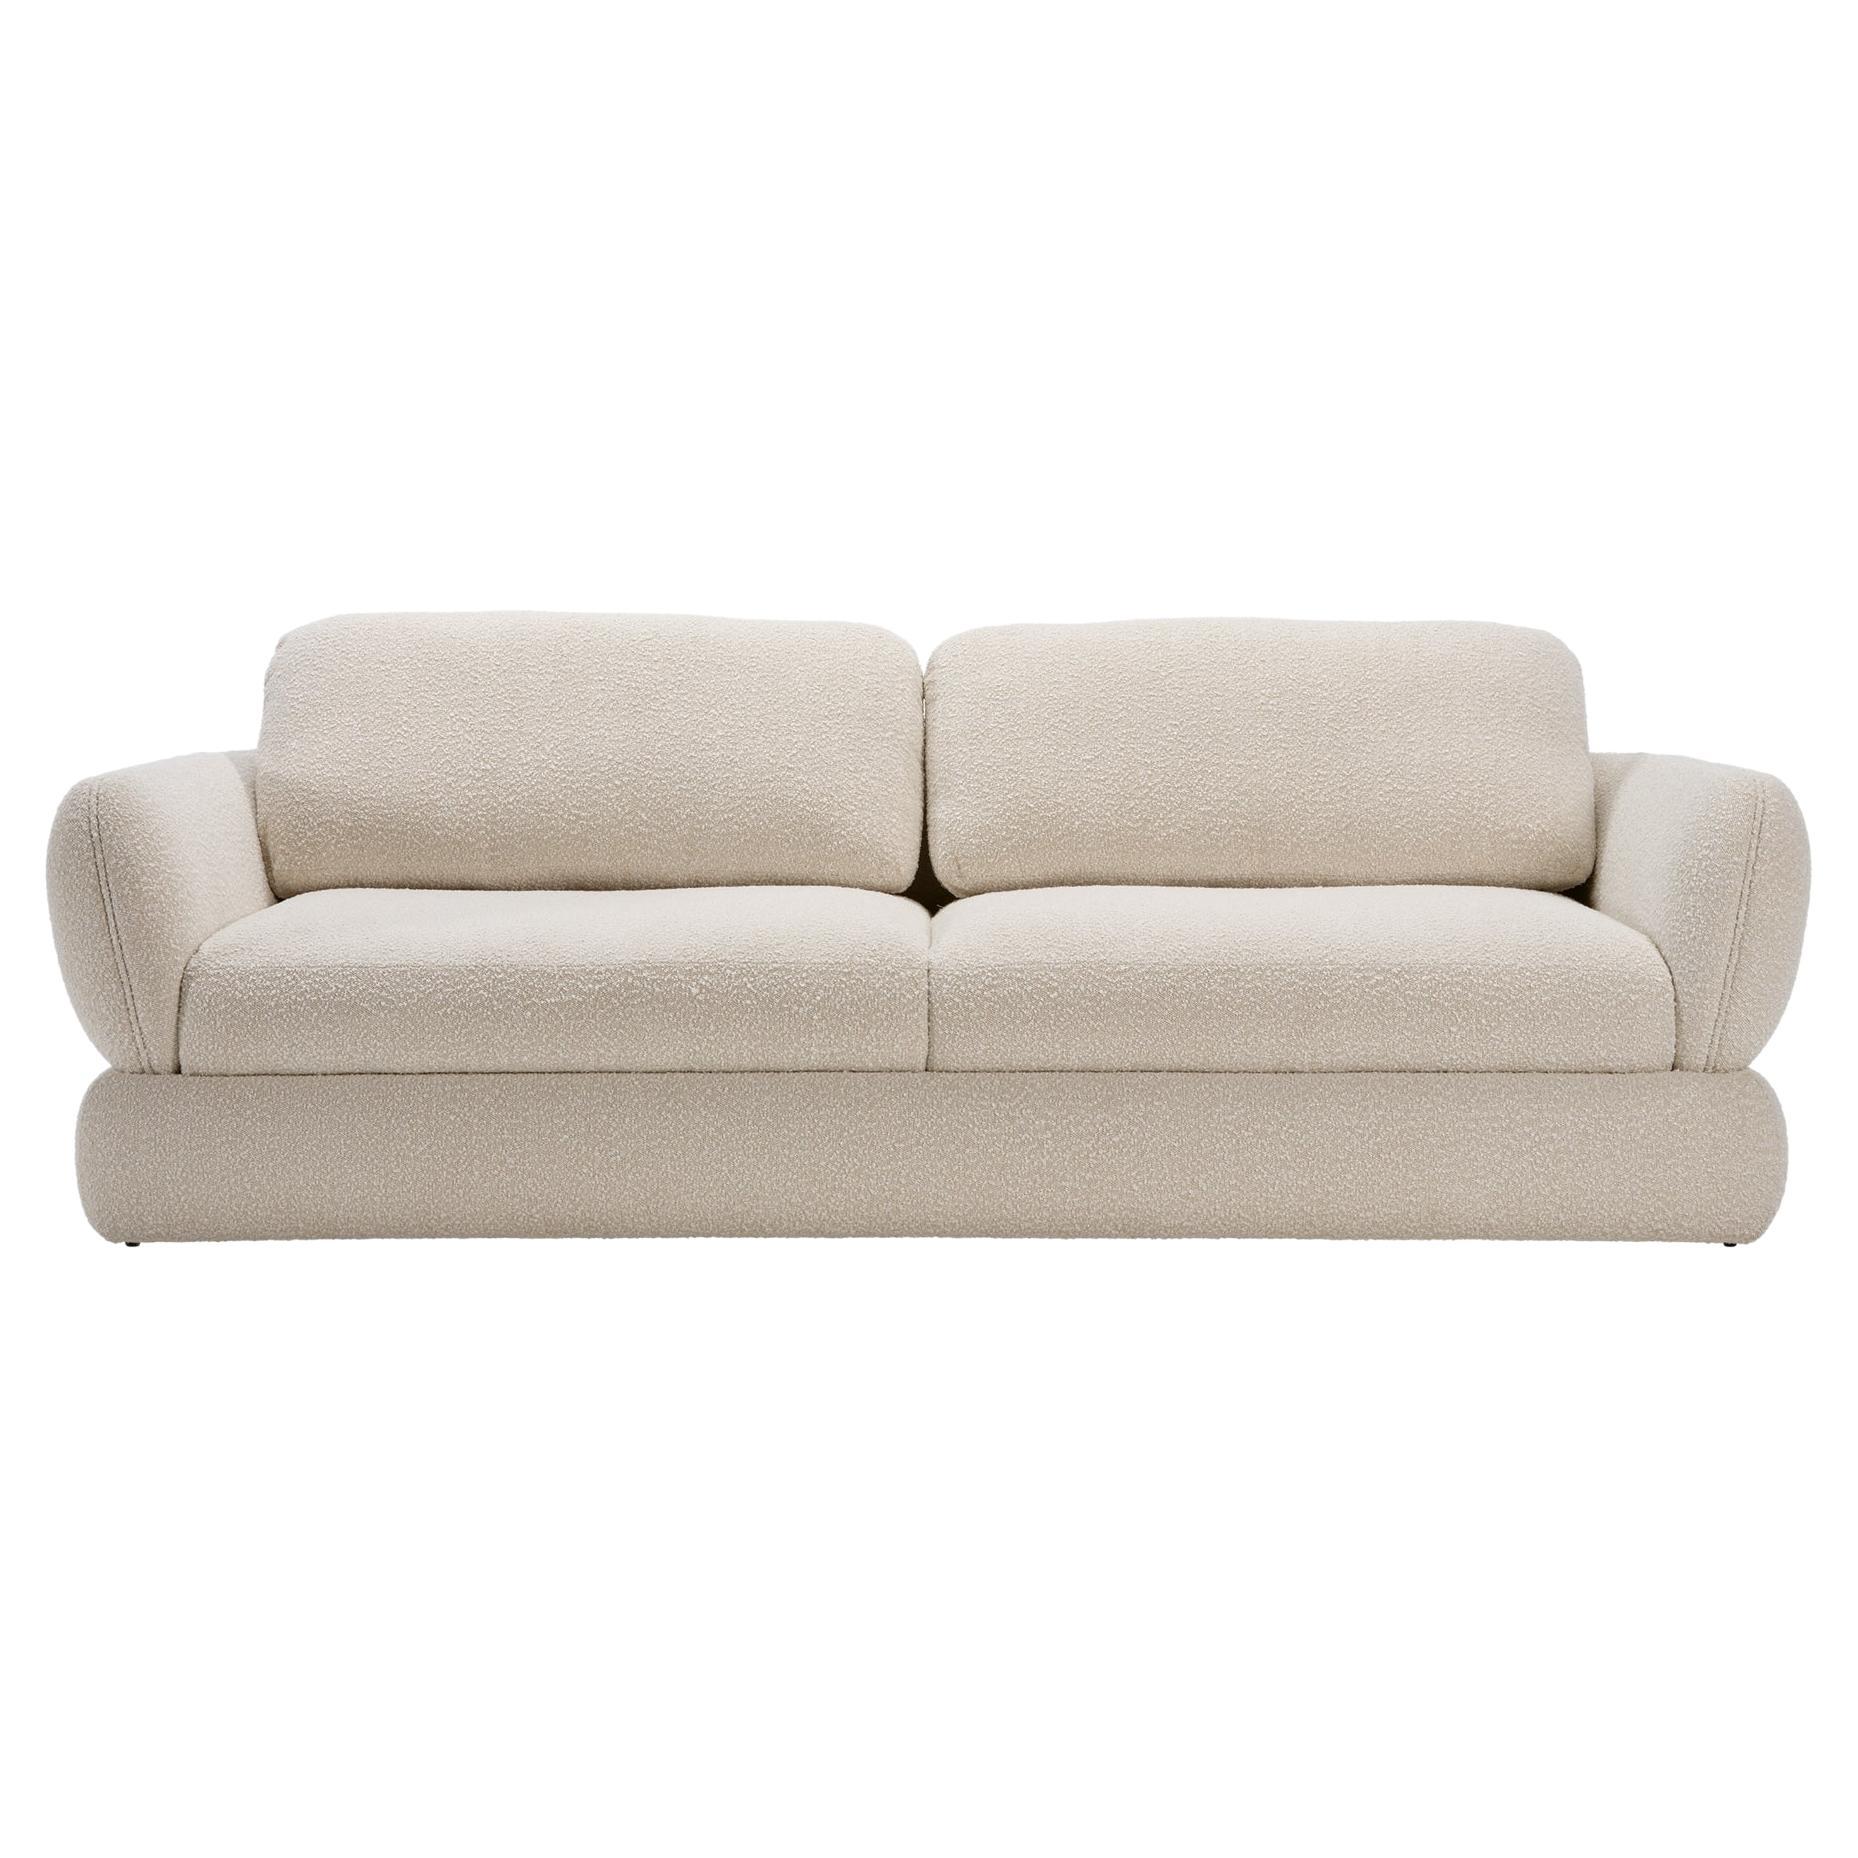 This sofa features a curved silhouette and round arms, softening your surrounding design scheme. A modern yet elegant addition to a living room, the sofa BELLAGIO is fully upholstered in a beautiful bouclé fabric.
Designed with a silhouette that